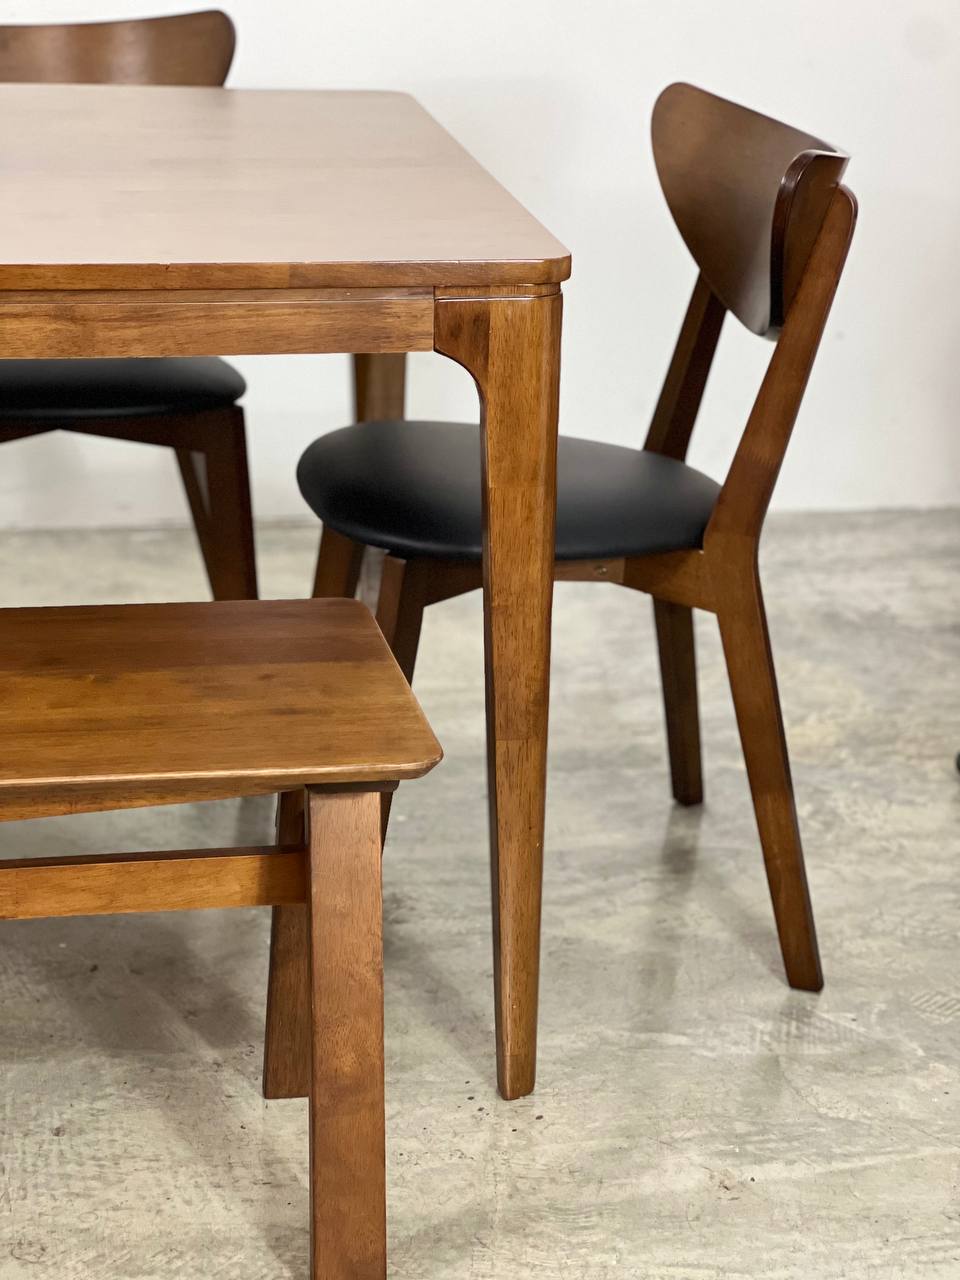 Walnut 1.8m Dining Table with 5 Hazel Chairs in Medium Brown + 1.5m Wooden Bench